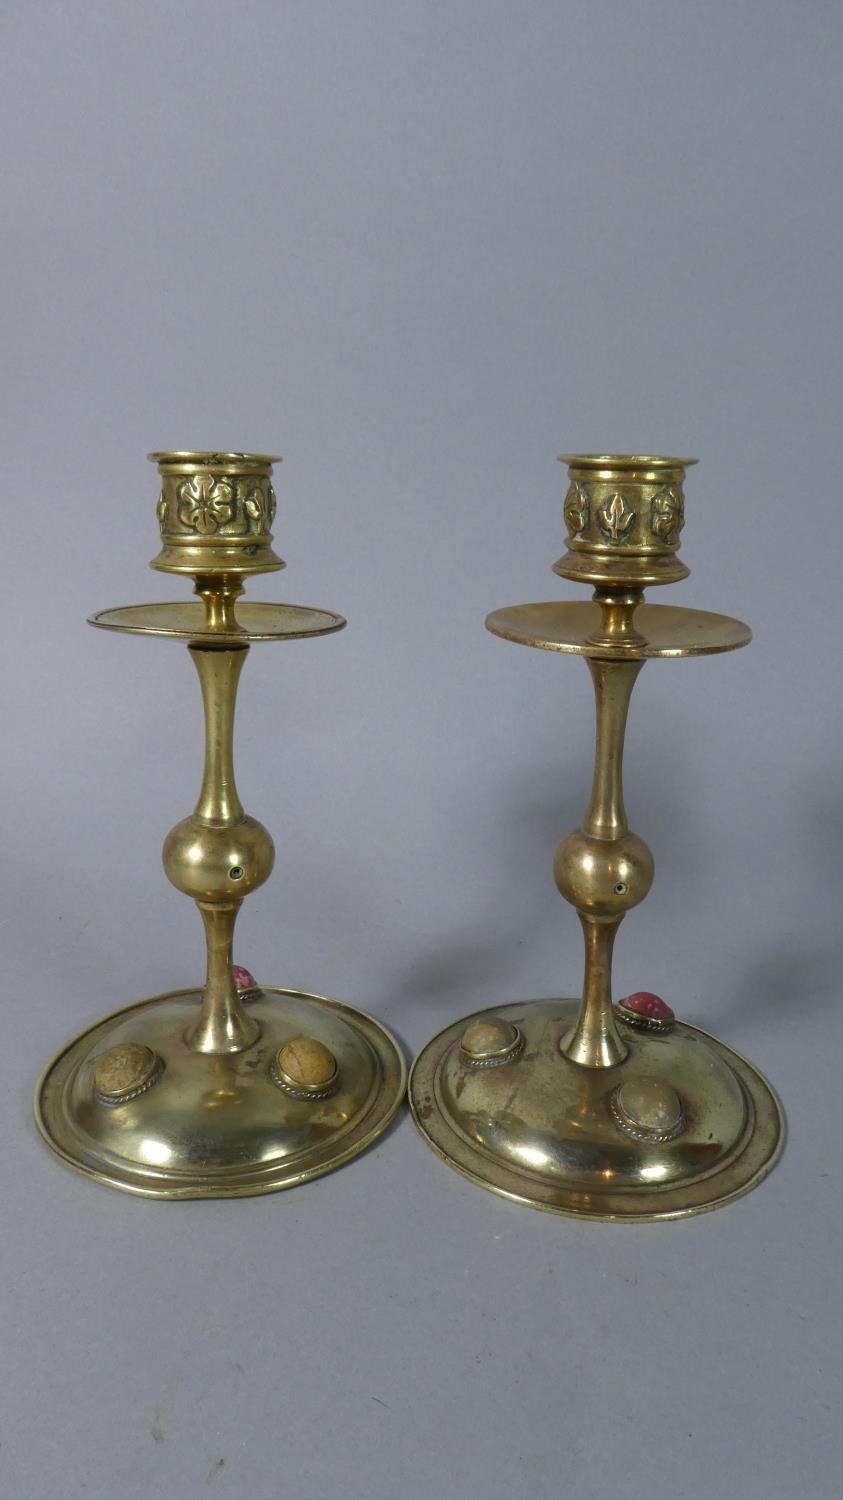 A Pair of Early 20th Century Arts and Crafts Influenced Brass Candlesticks with Stone Cabochons,